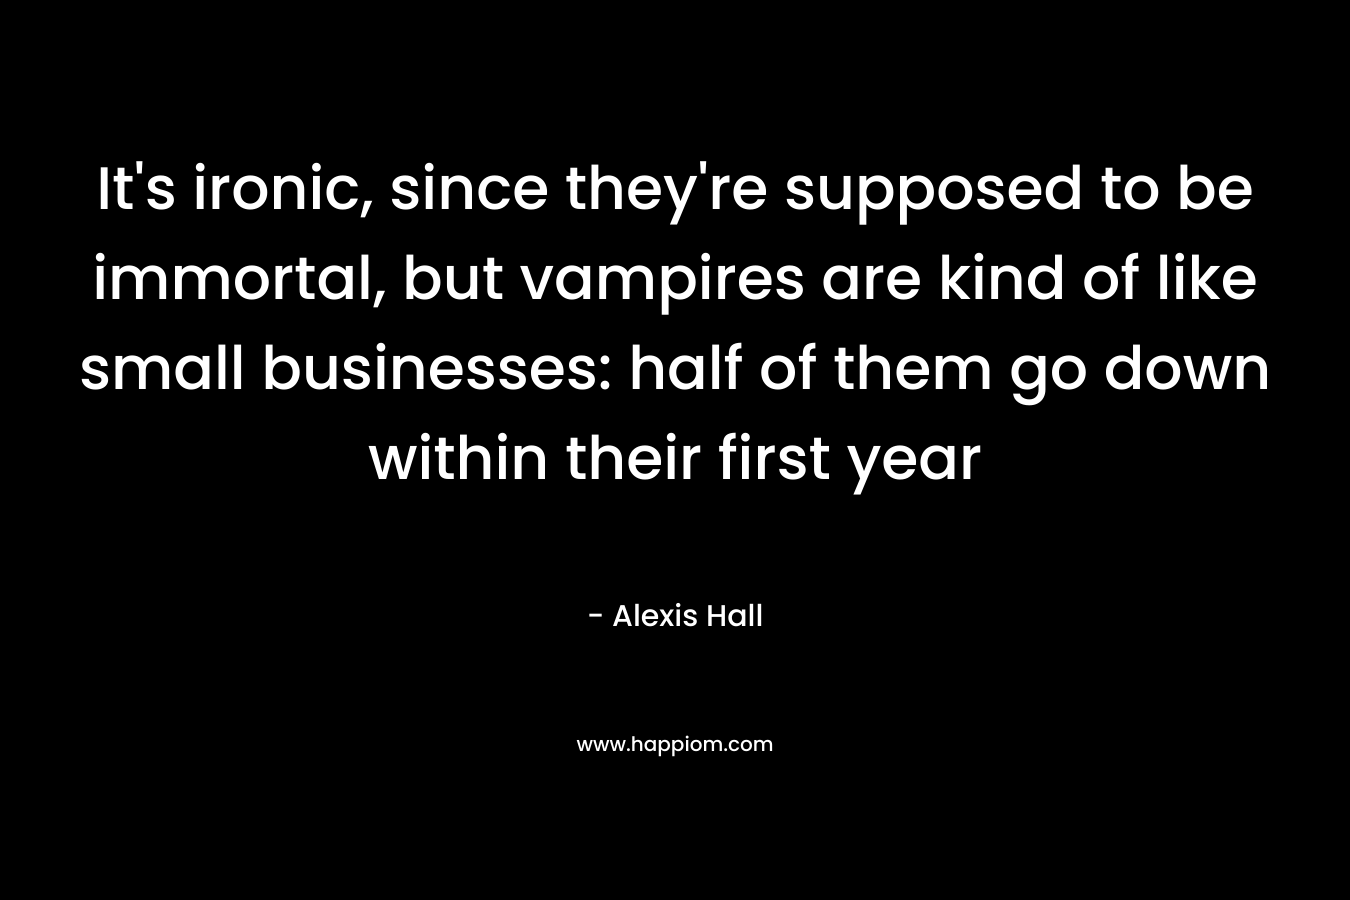 It’s ironic, since they’re supposed to be immortal, but vampires are kind of like small businesses: half of them go down within their first year – Alexis  Hall